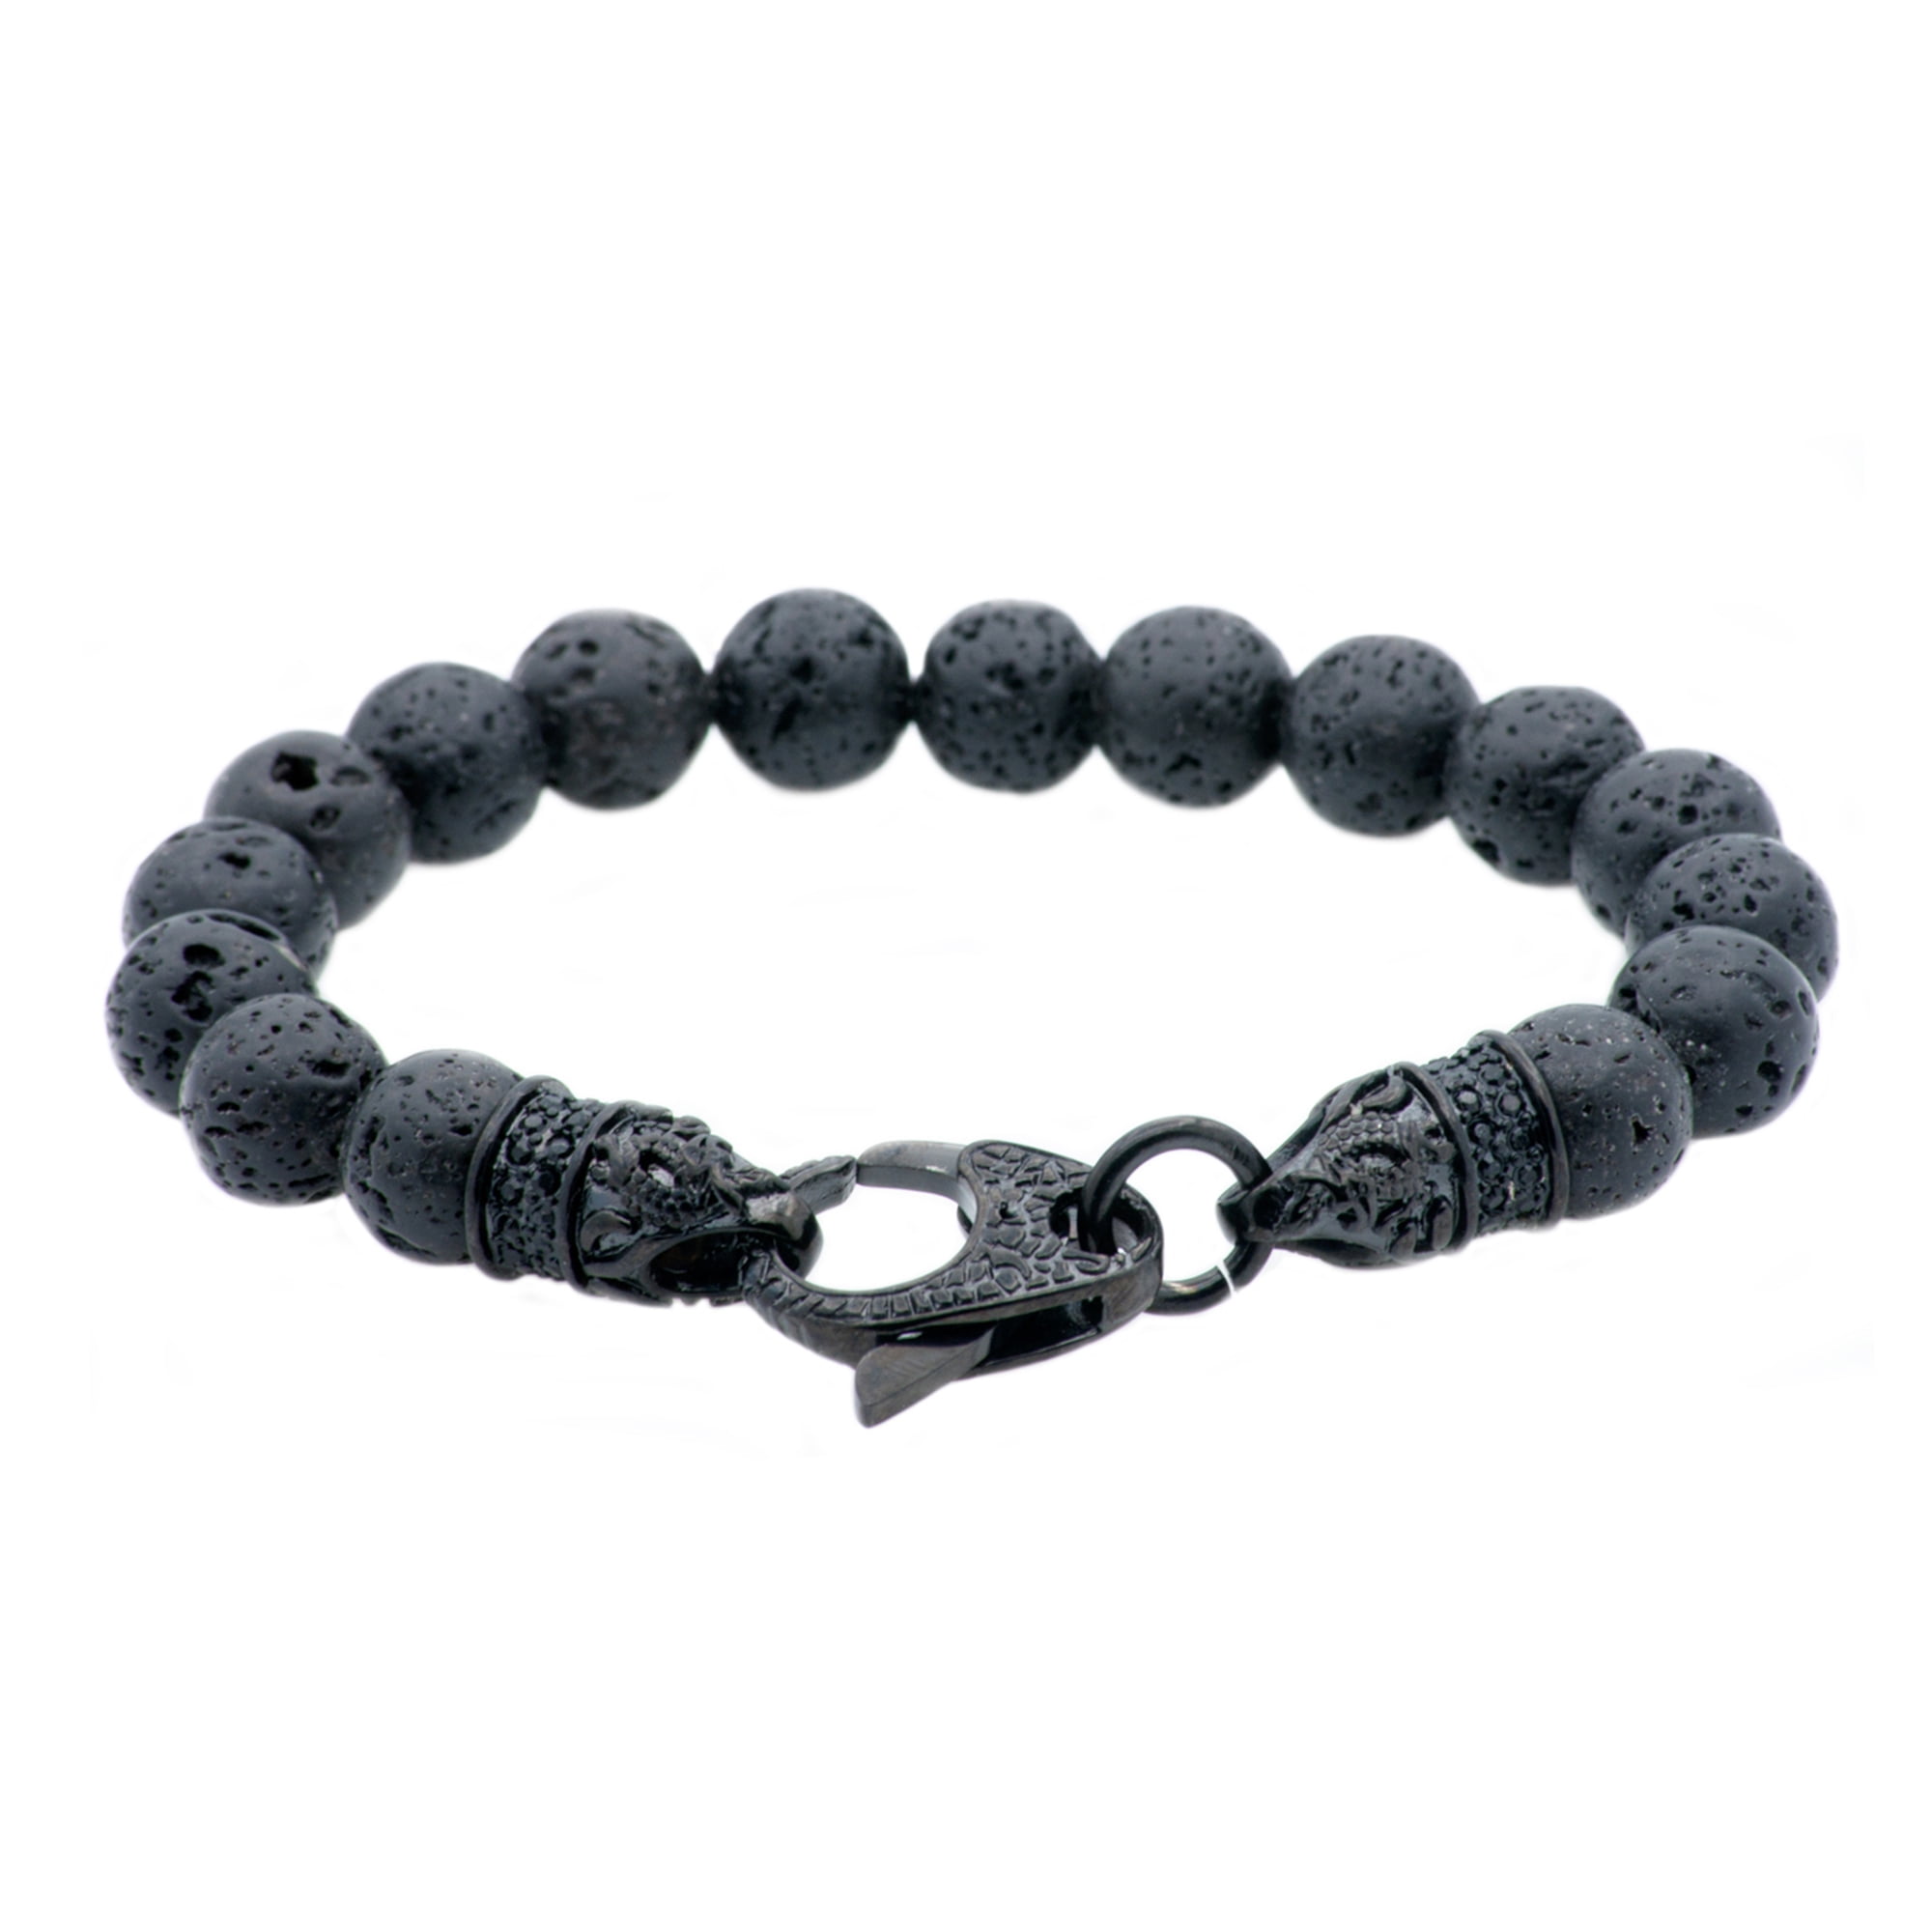 Black Lava Stone Beaded Bracelet for Men, Red Bead and Silver Details! –  Colors And Shine